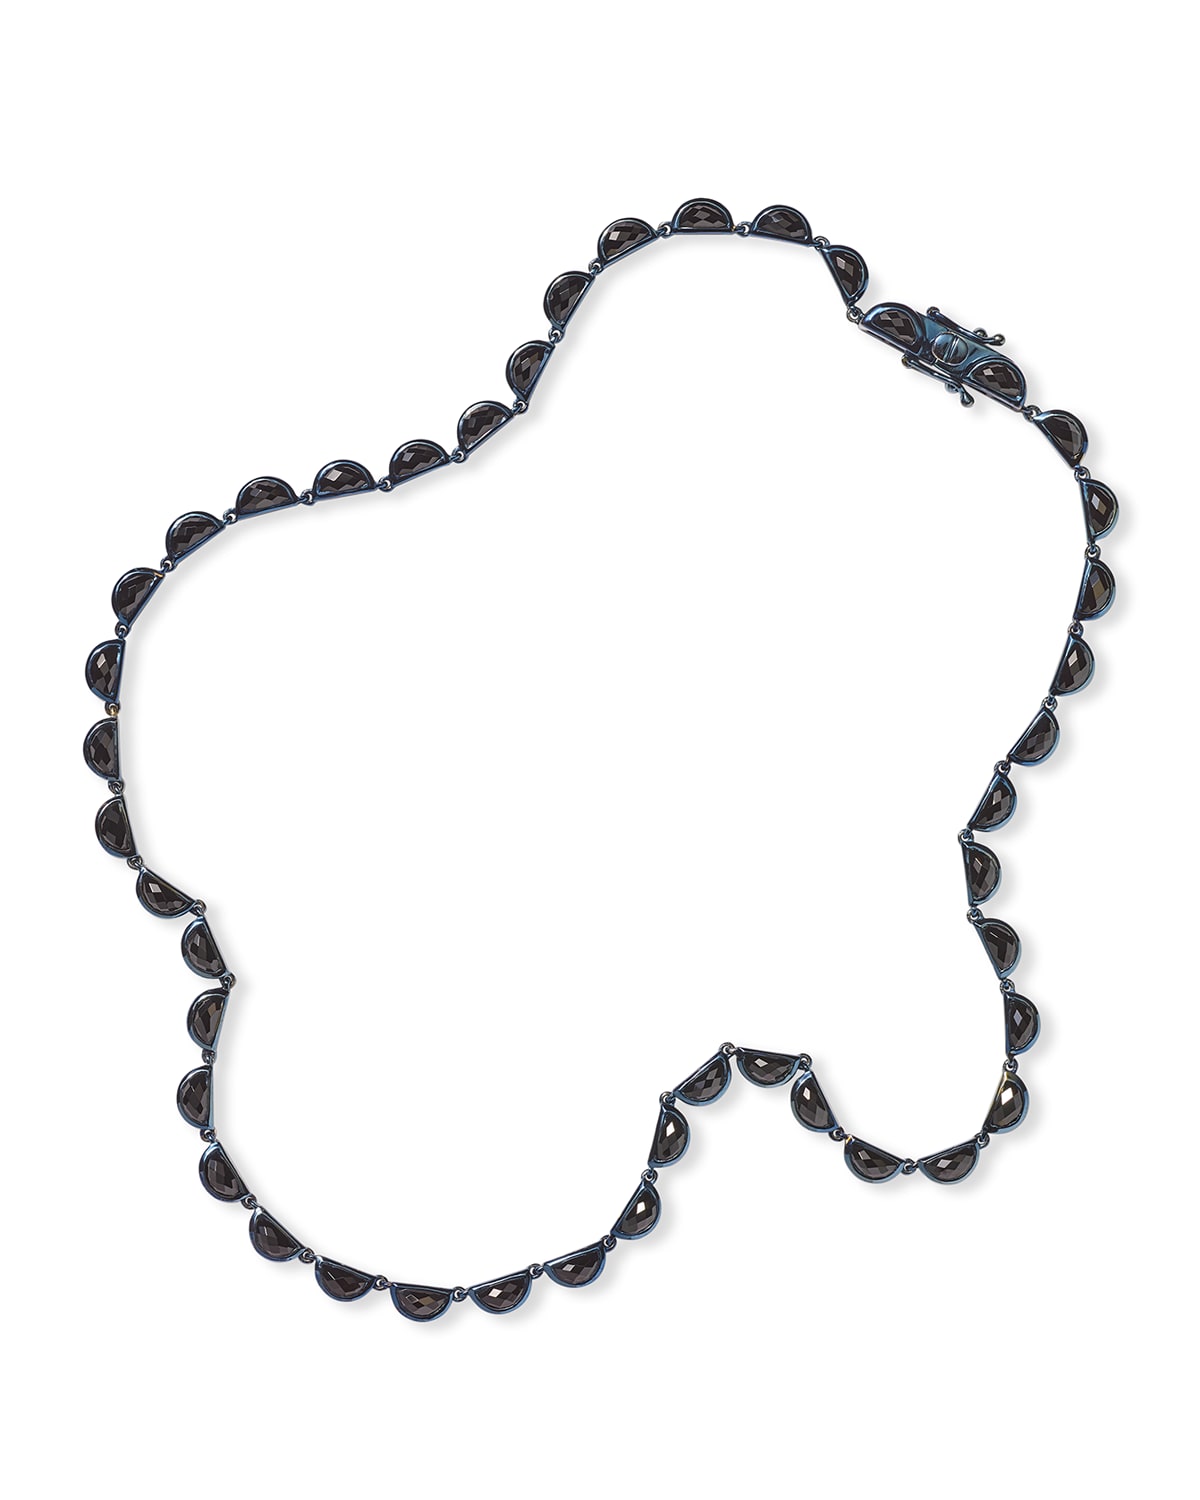 Small Scallop Riviere Necklace in Black Spinel